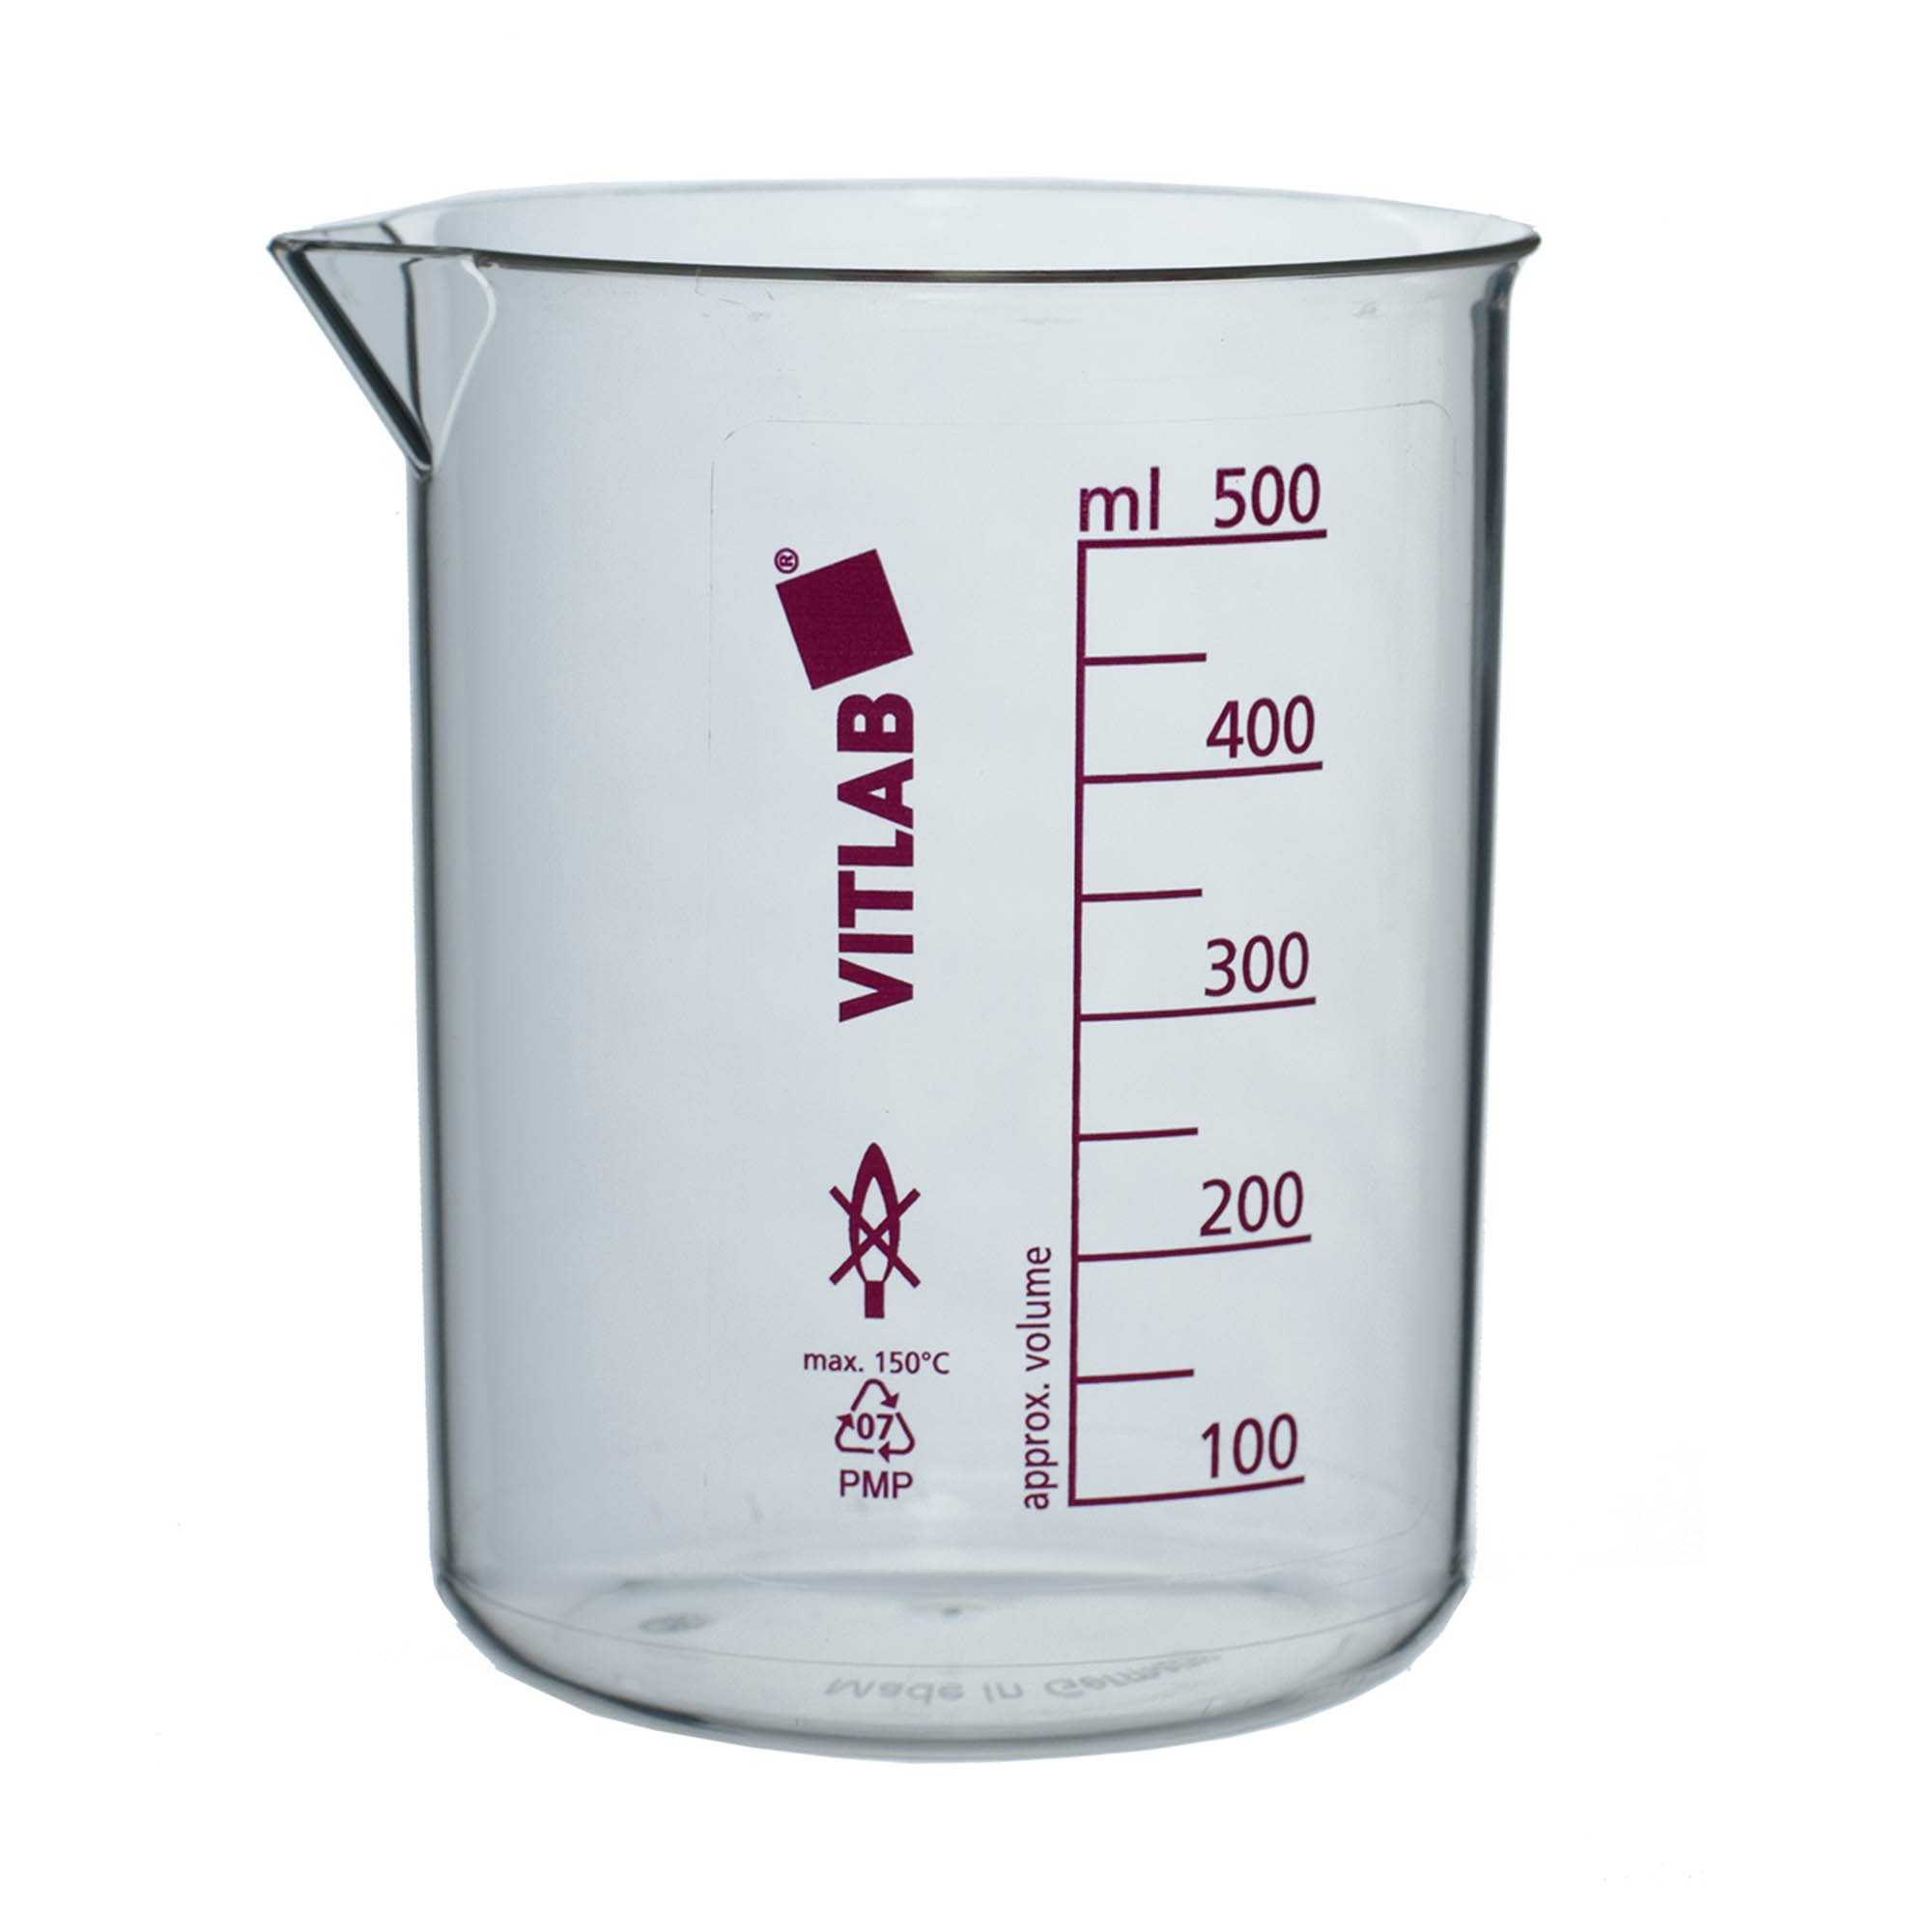 https://www.universalmedicalinc.com/media/catalog/product/cache/b4c565ddf1bc021465048acd78c313cc/6/1/61803_pmp-griffin-beaker-with-red-screened-graduations-500ml-pack-of-6.jpg